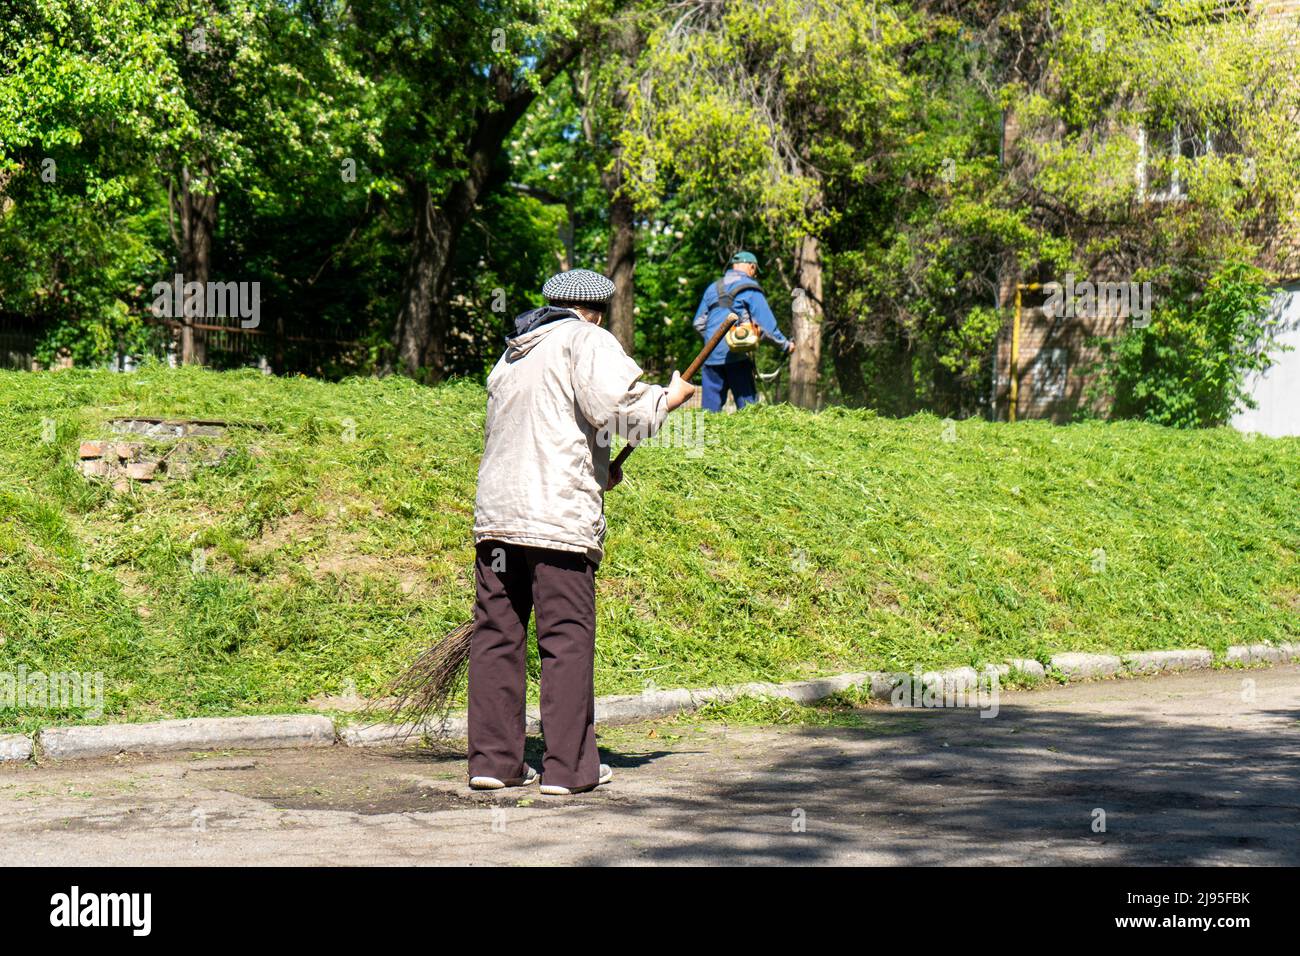 Old woman sweeping the street in the city. Man in the background mows the grass Stock Photo